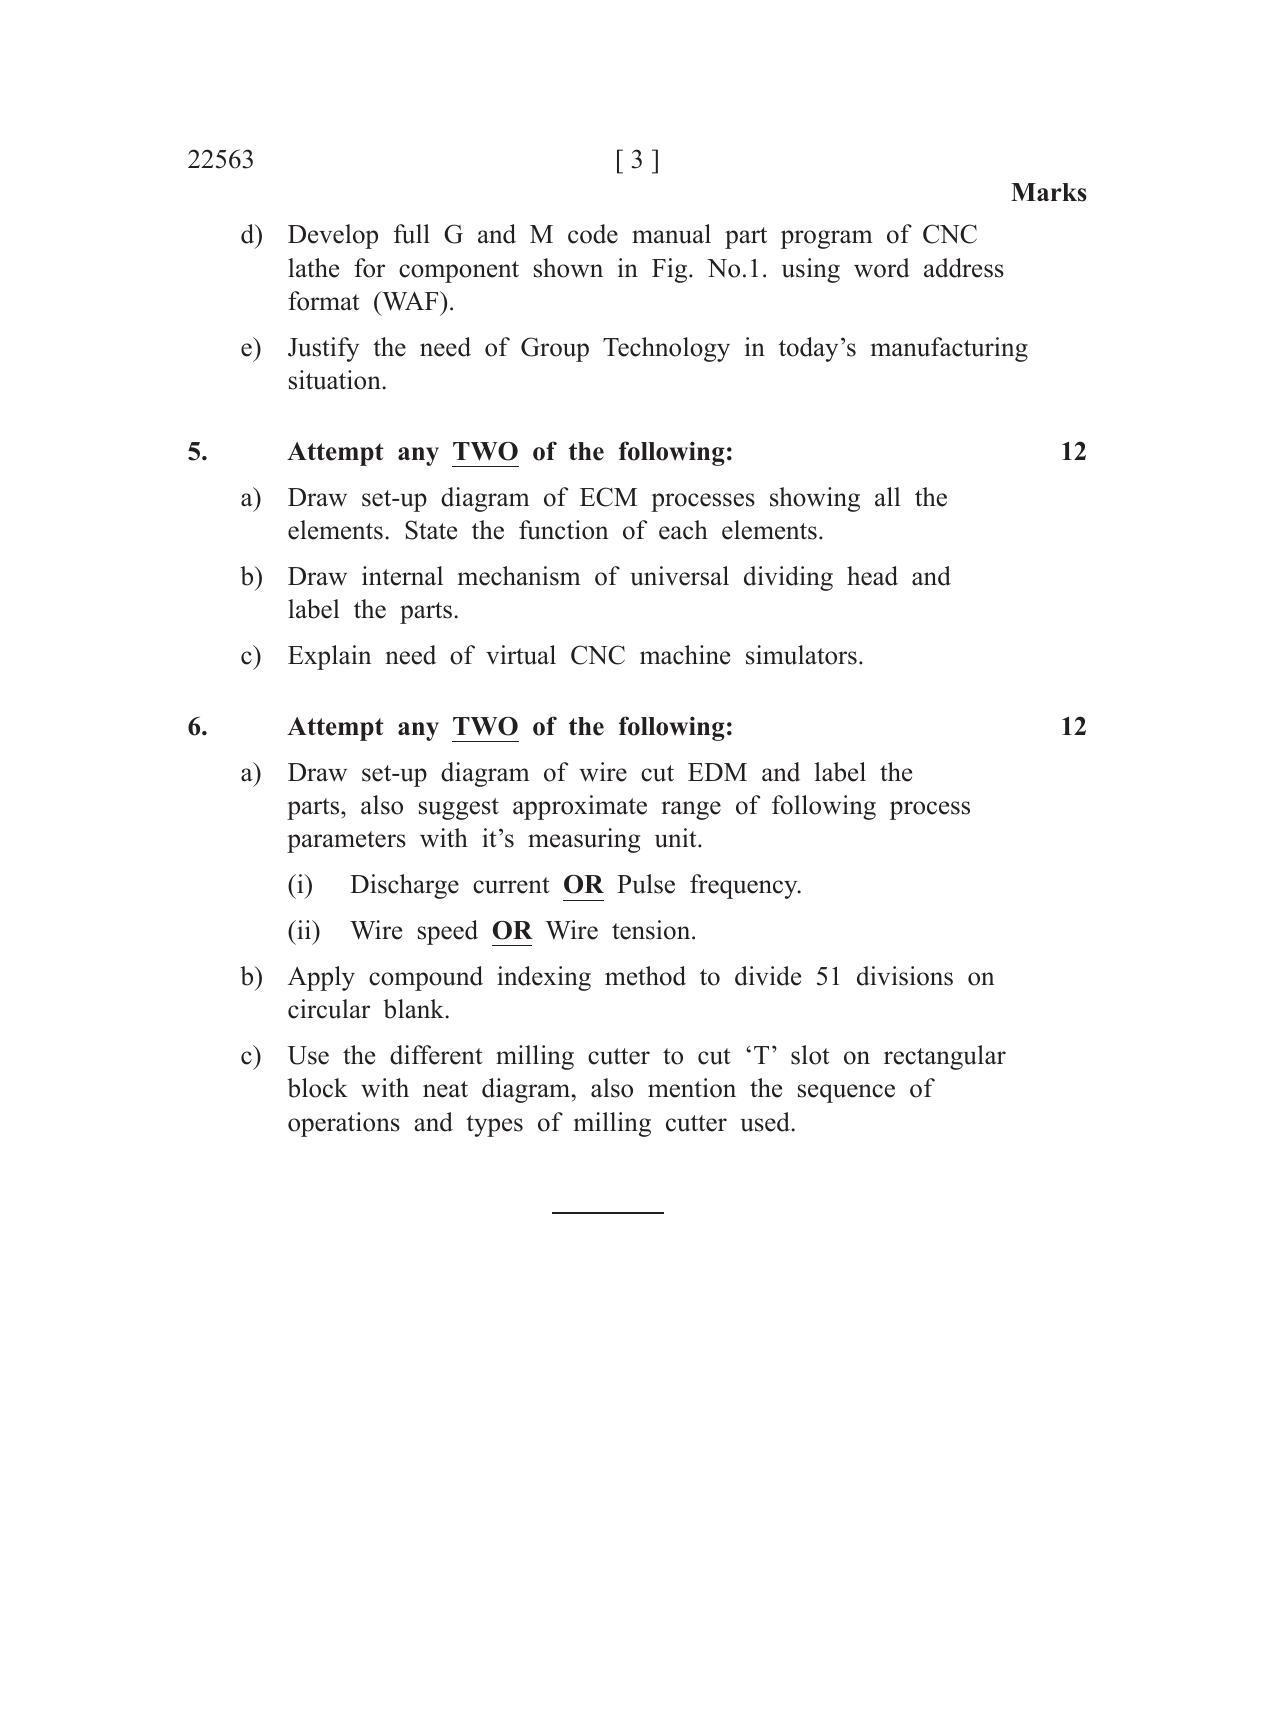 MSBTE Question Paper - 2019 - Advanced Manufacturing Processes - Page 3